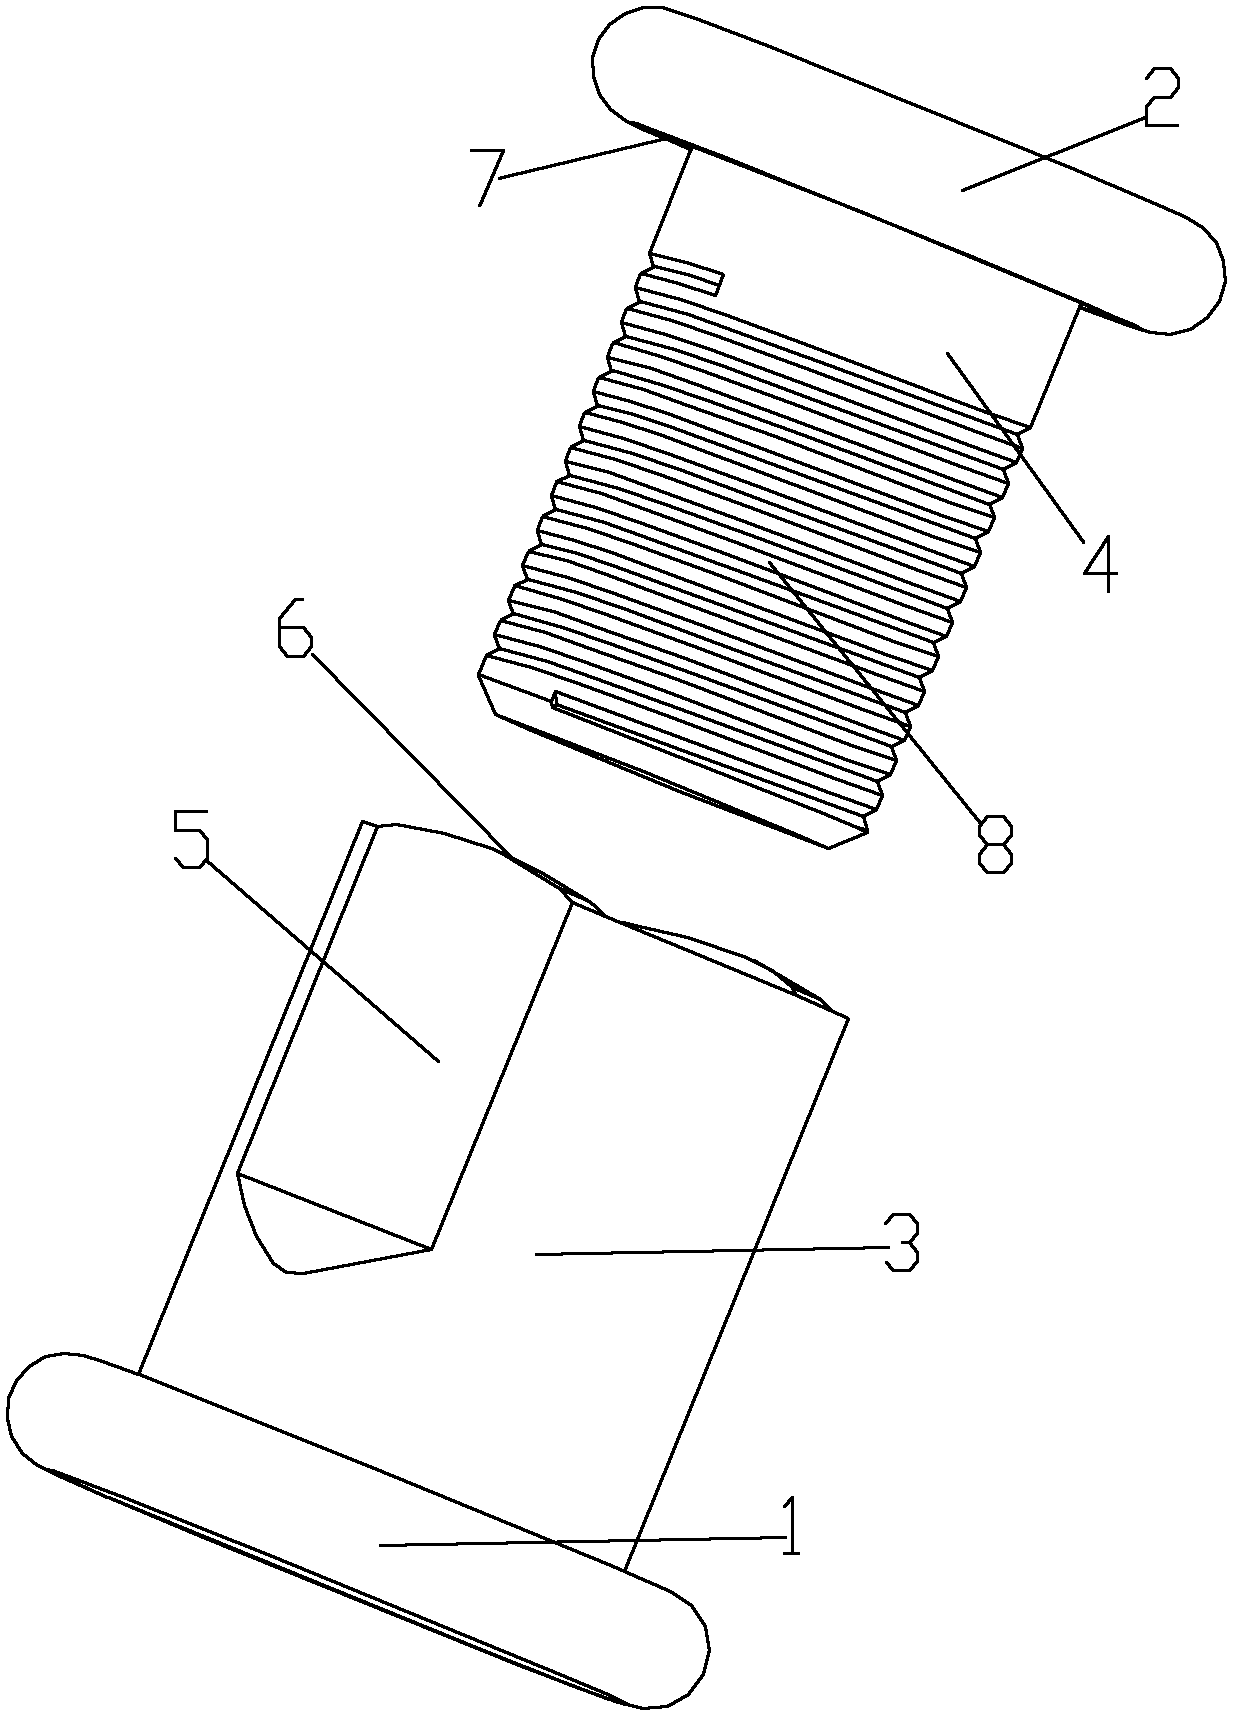 Coupling screw for shear bodies